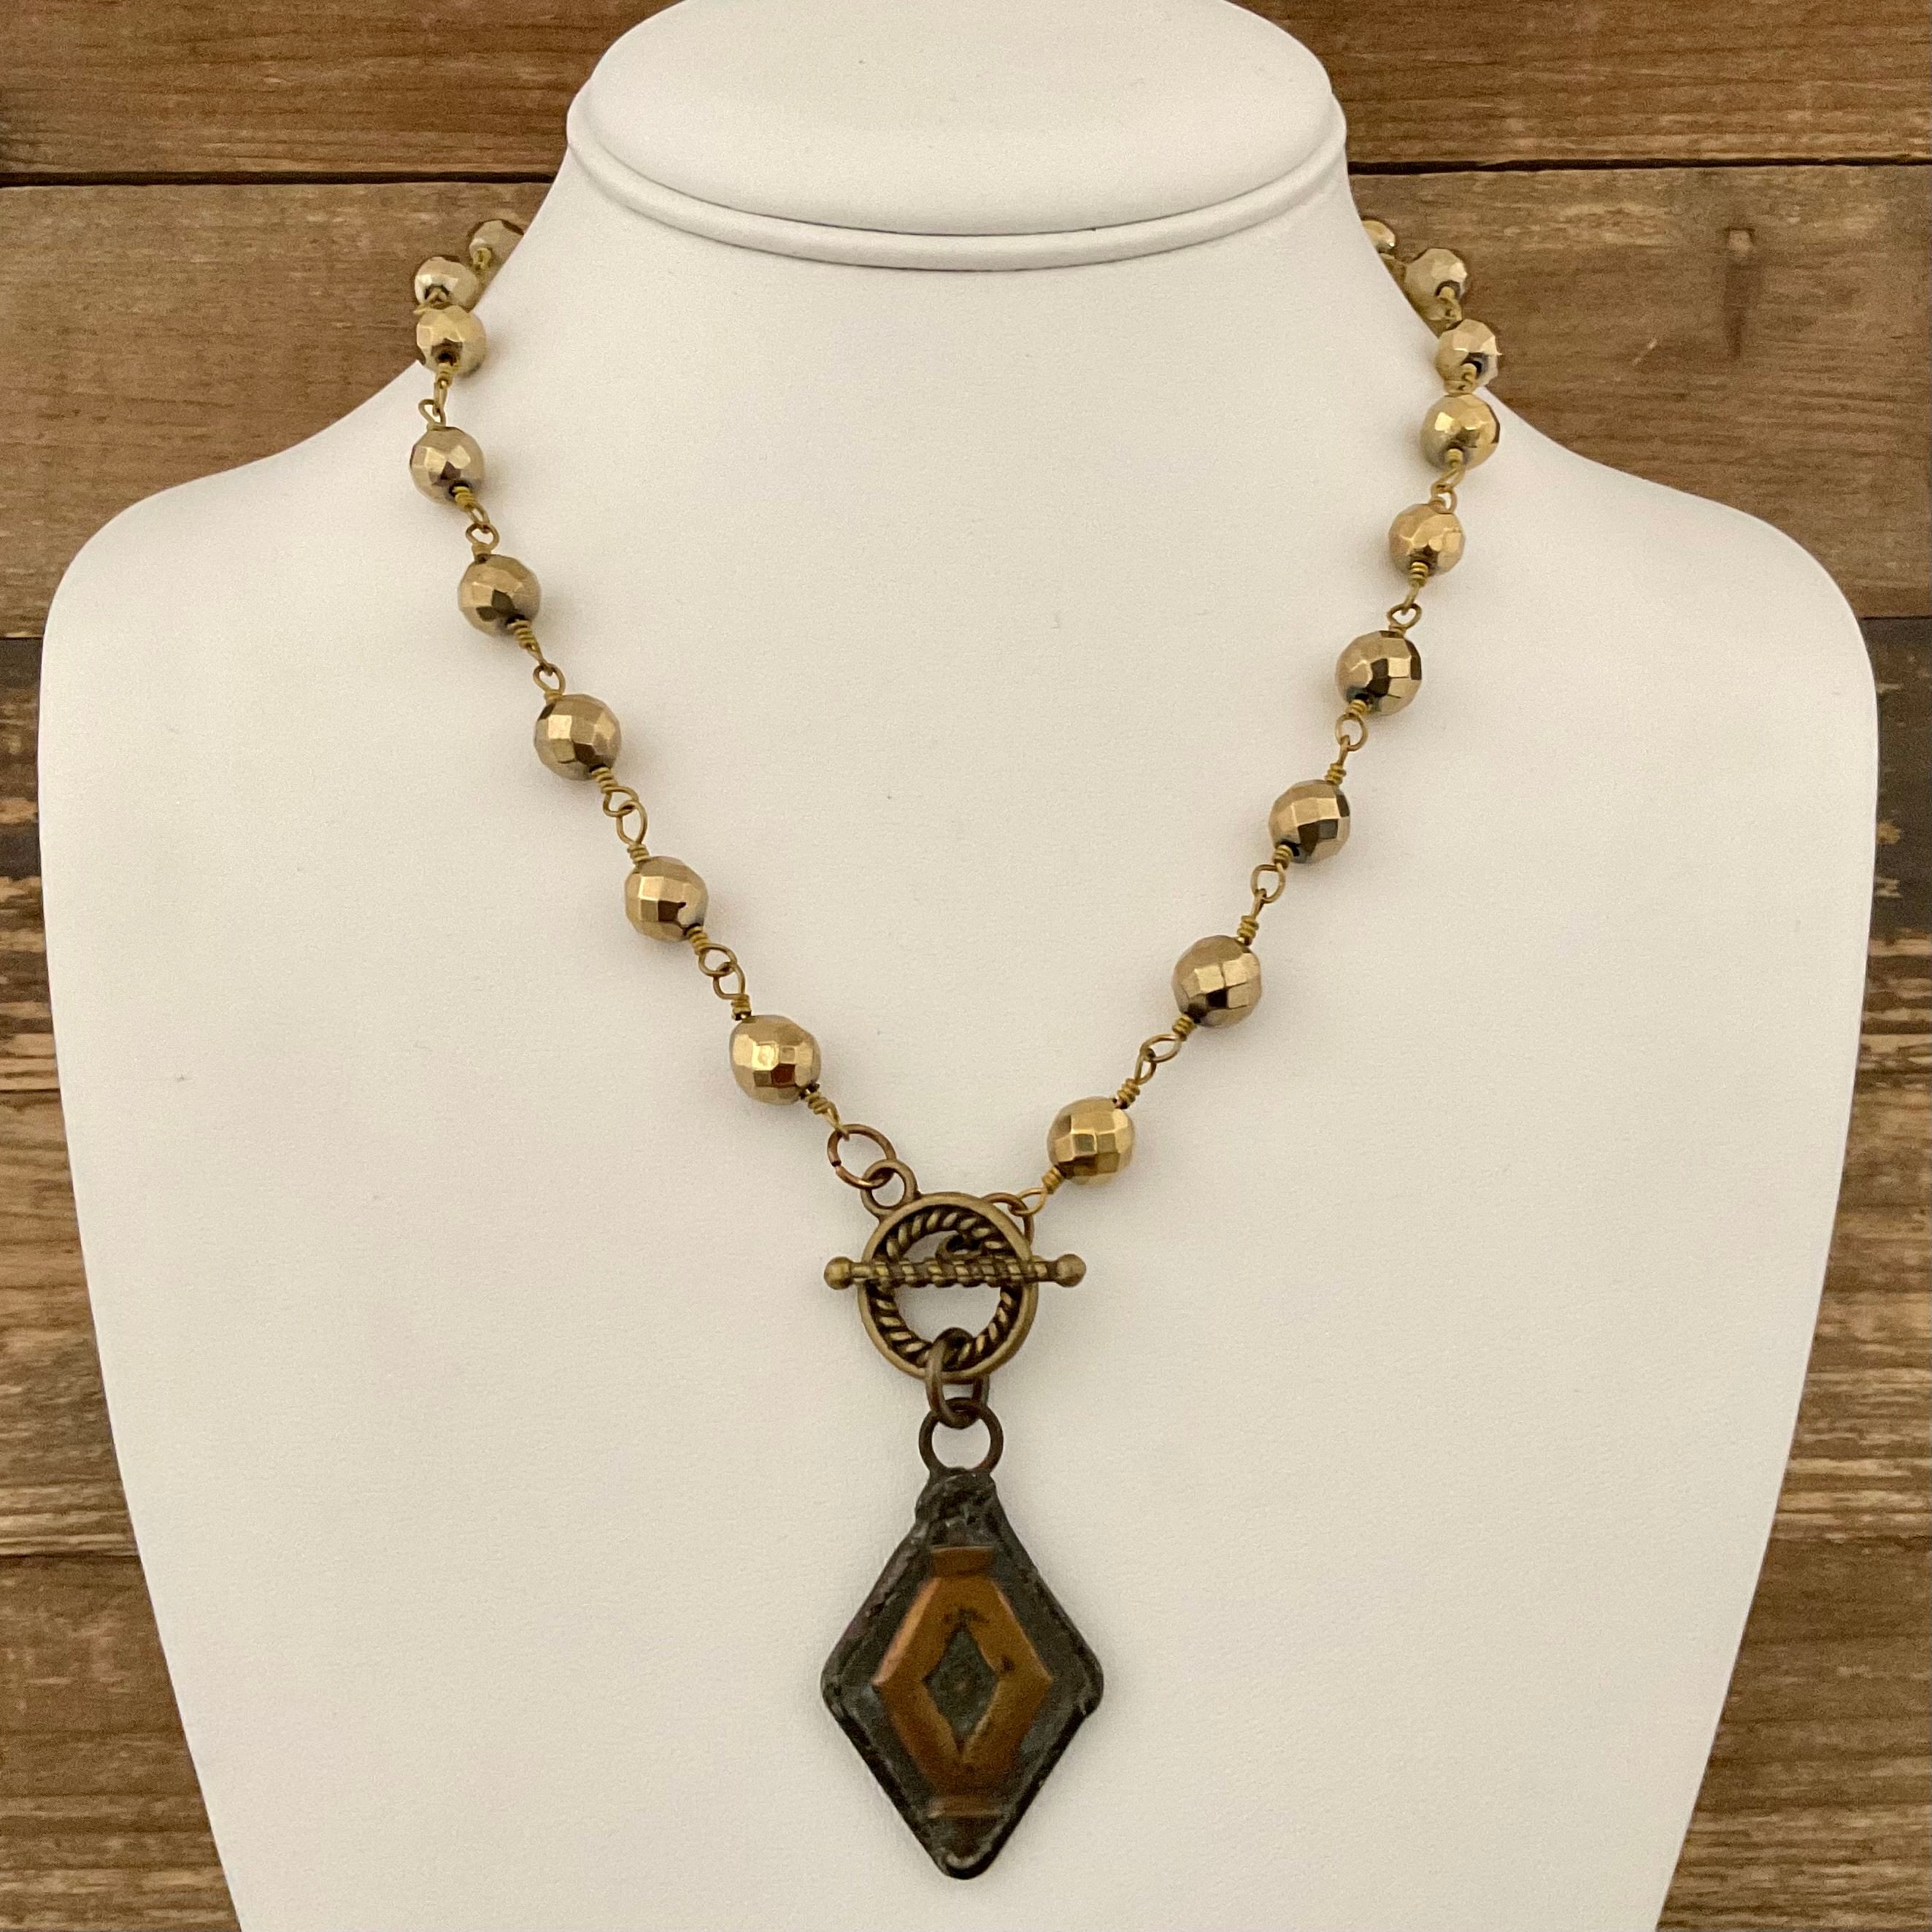 Gold Hematite Toggle Necklace with Vintage Soldered Pendant 18